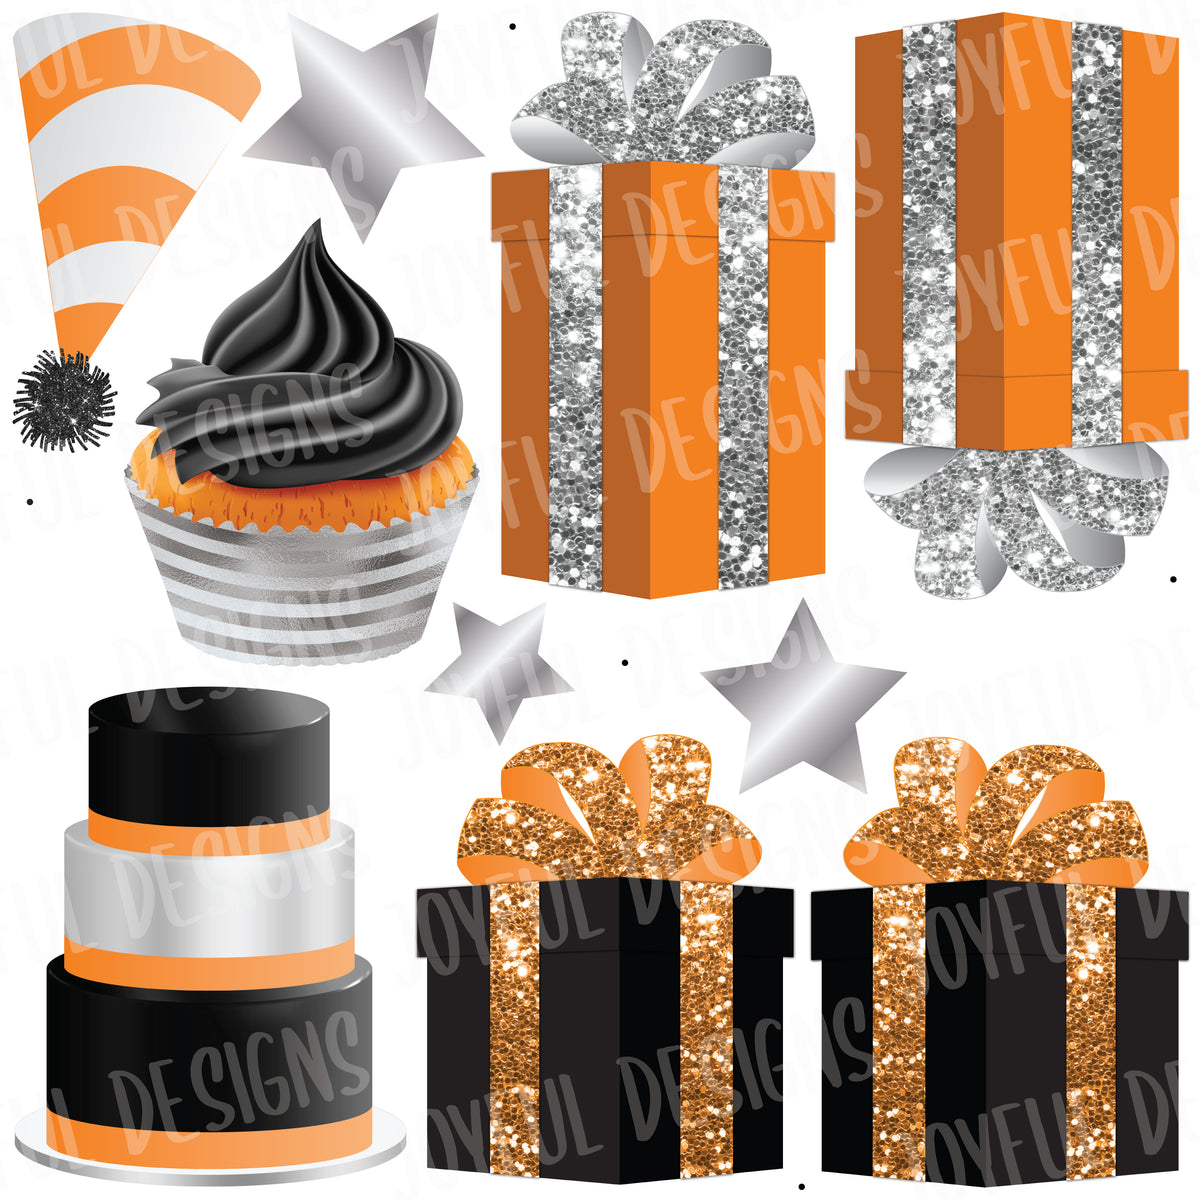 Orange, Black and Silver Birthday Flair Half from "One and Done" Set